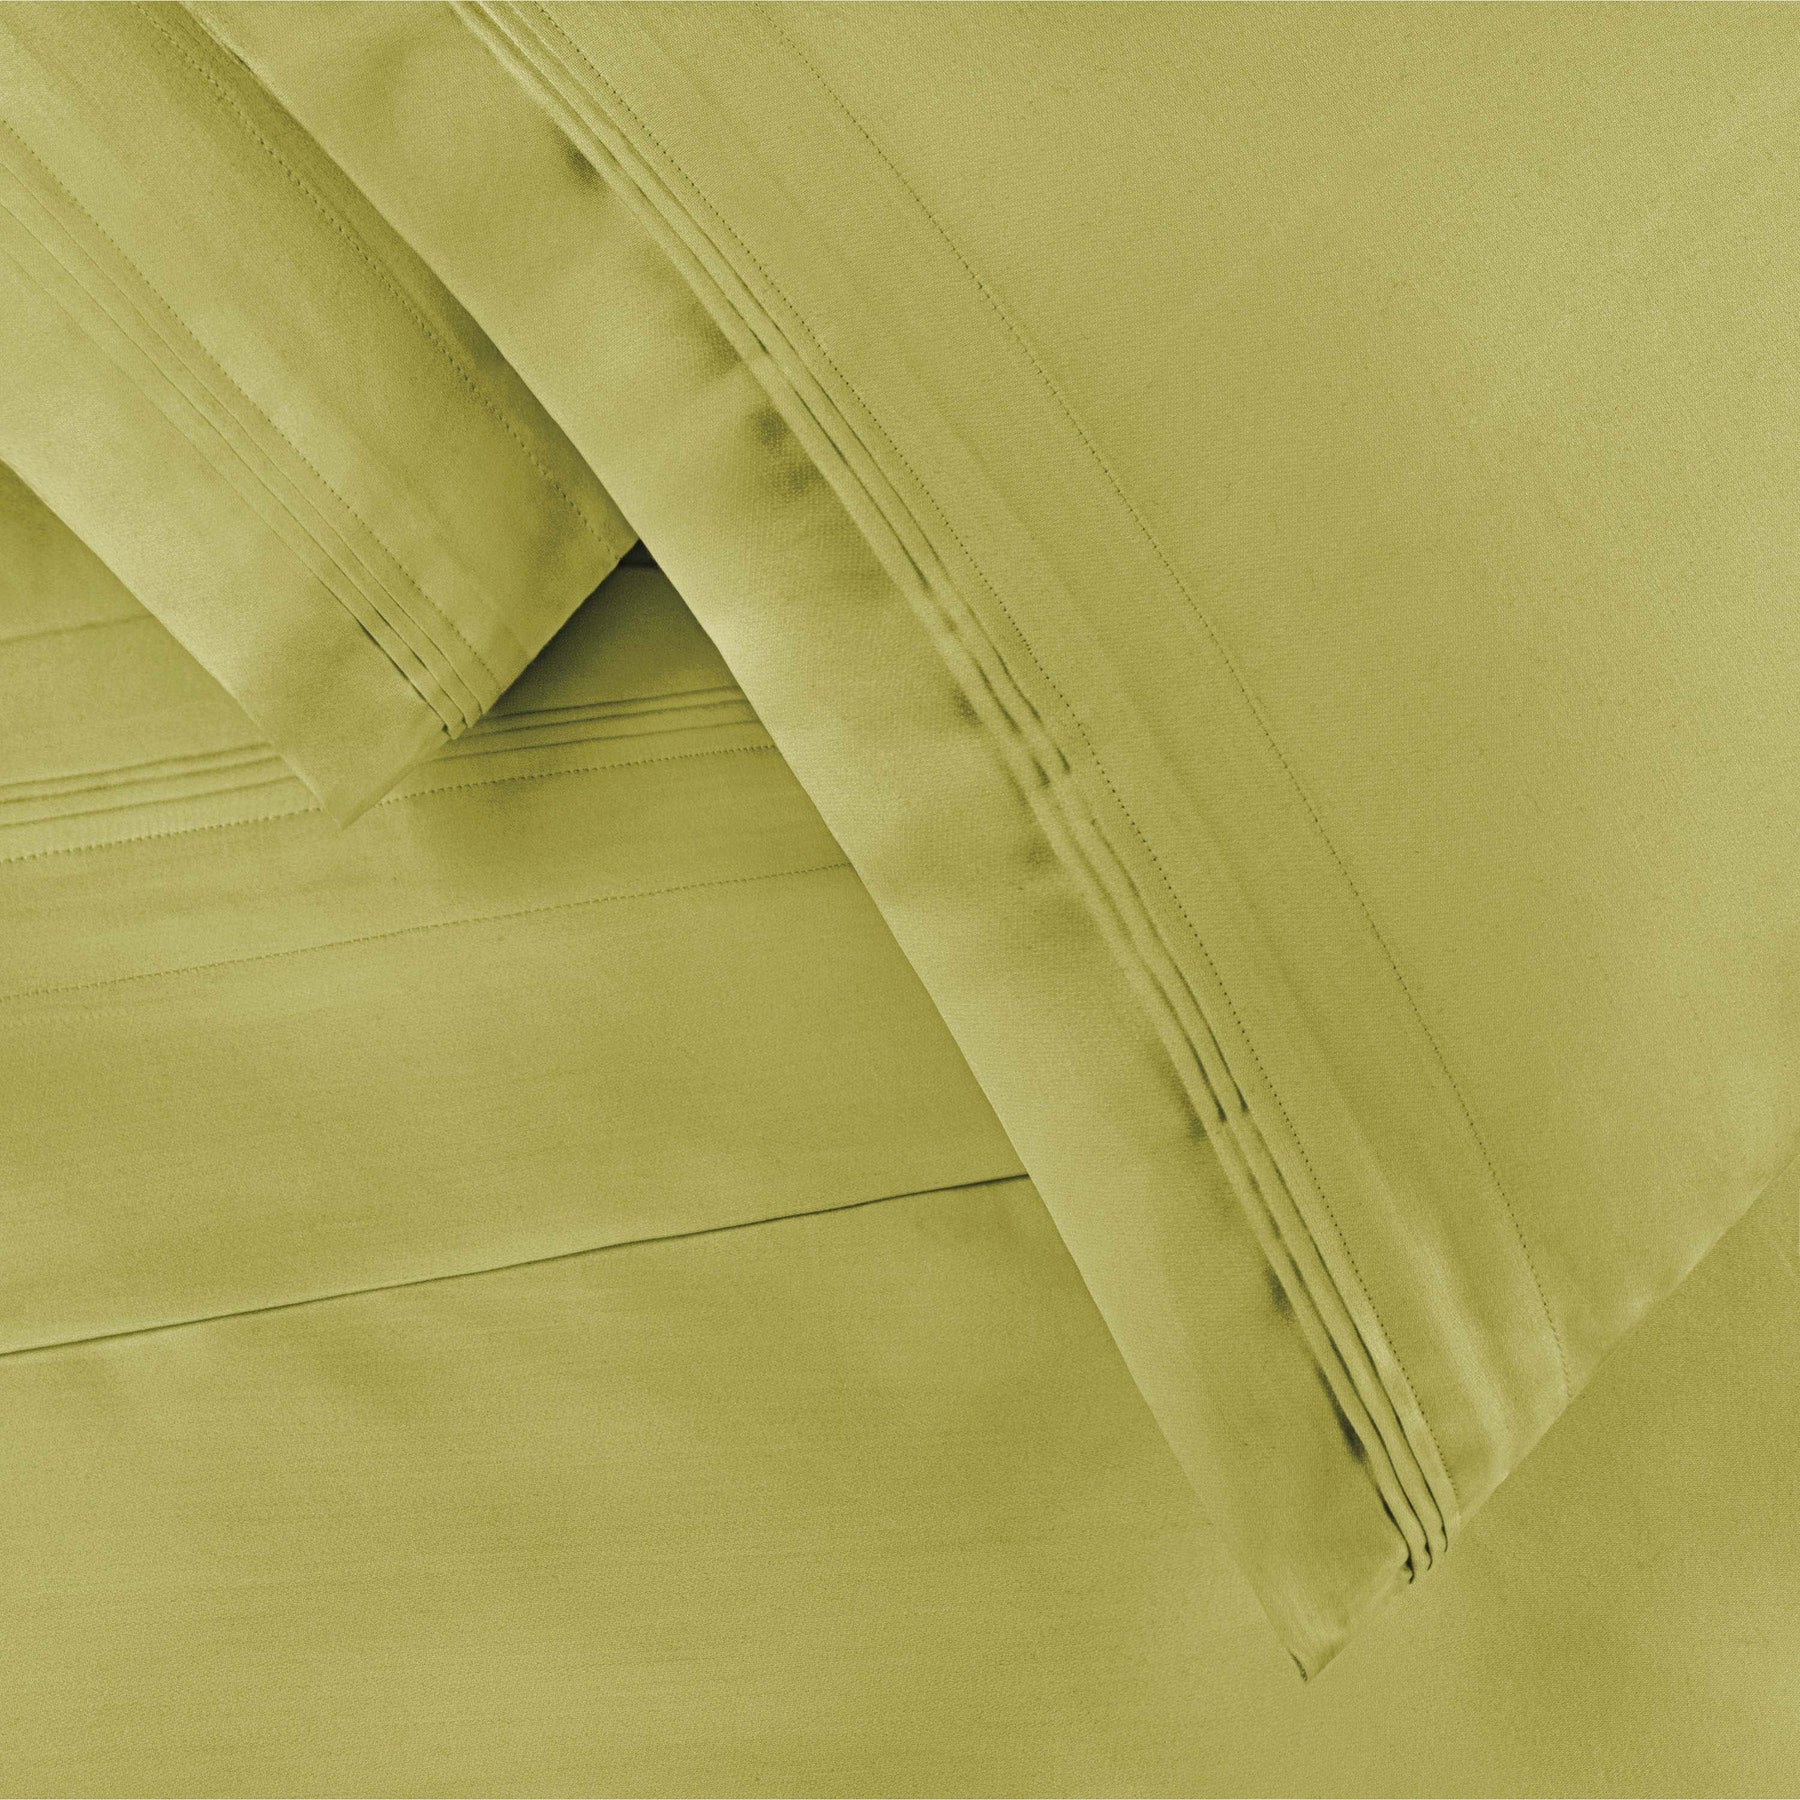  Egyptian Cotton 650 Thread Count Eco-Friendly Solid Sheet Set - OliveGreen